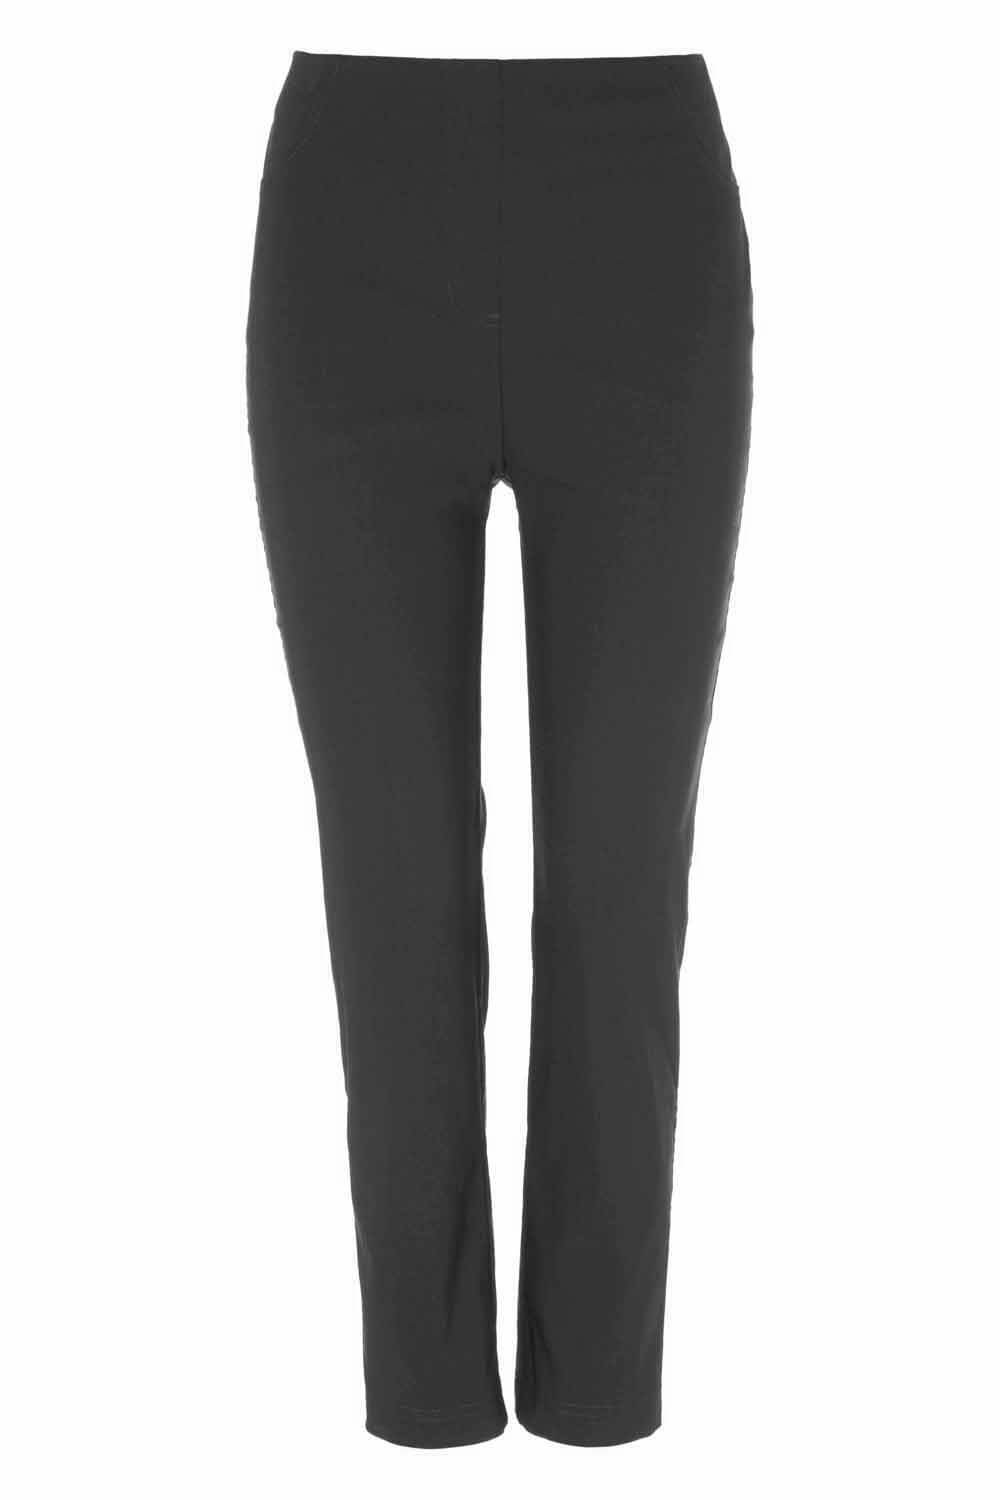 Black 3/4 Length Stretch Trouser, Image 4 of 4